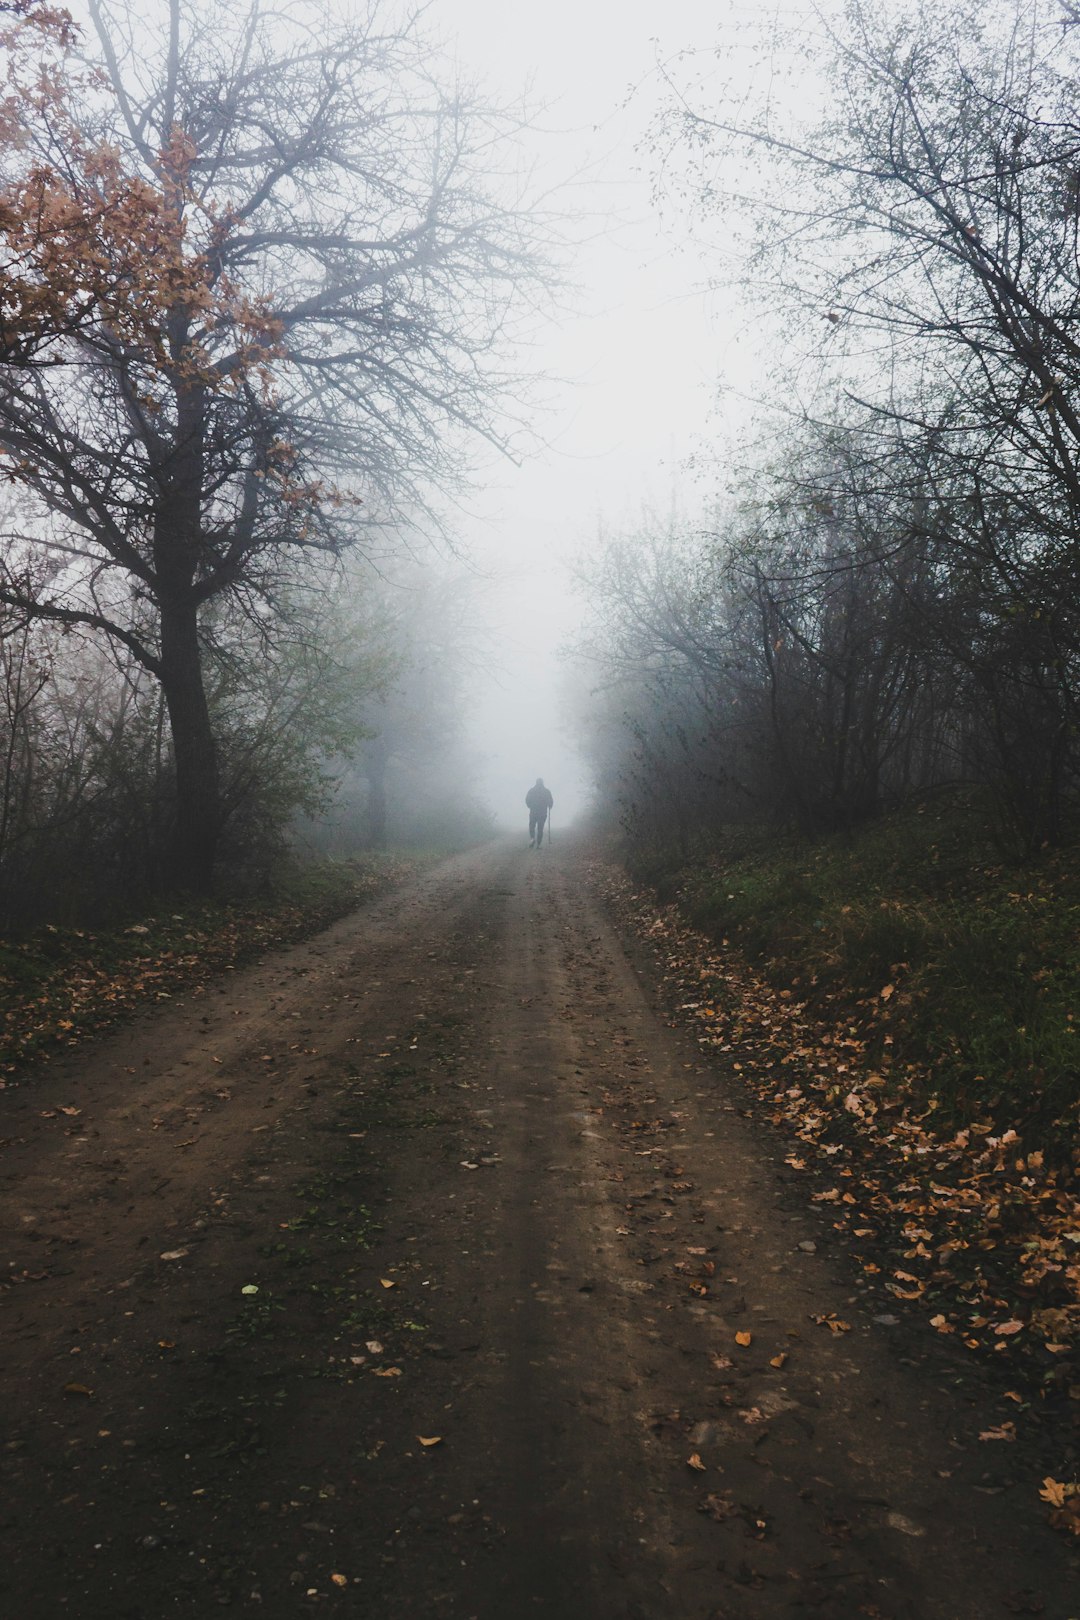 person walking on dirt road between bare trees during foggy time